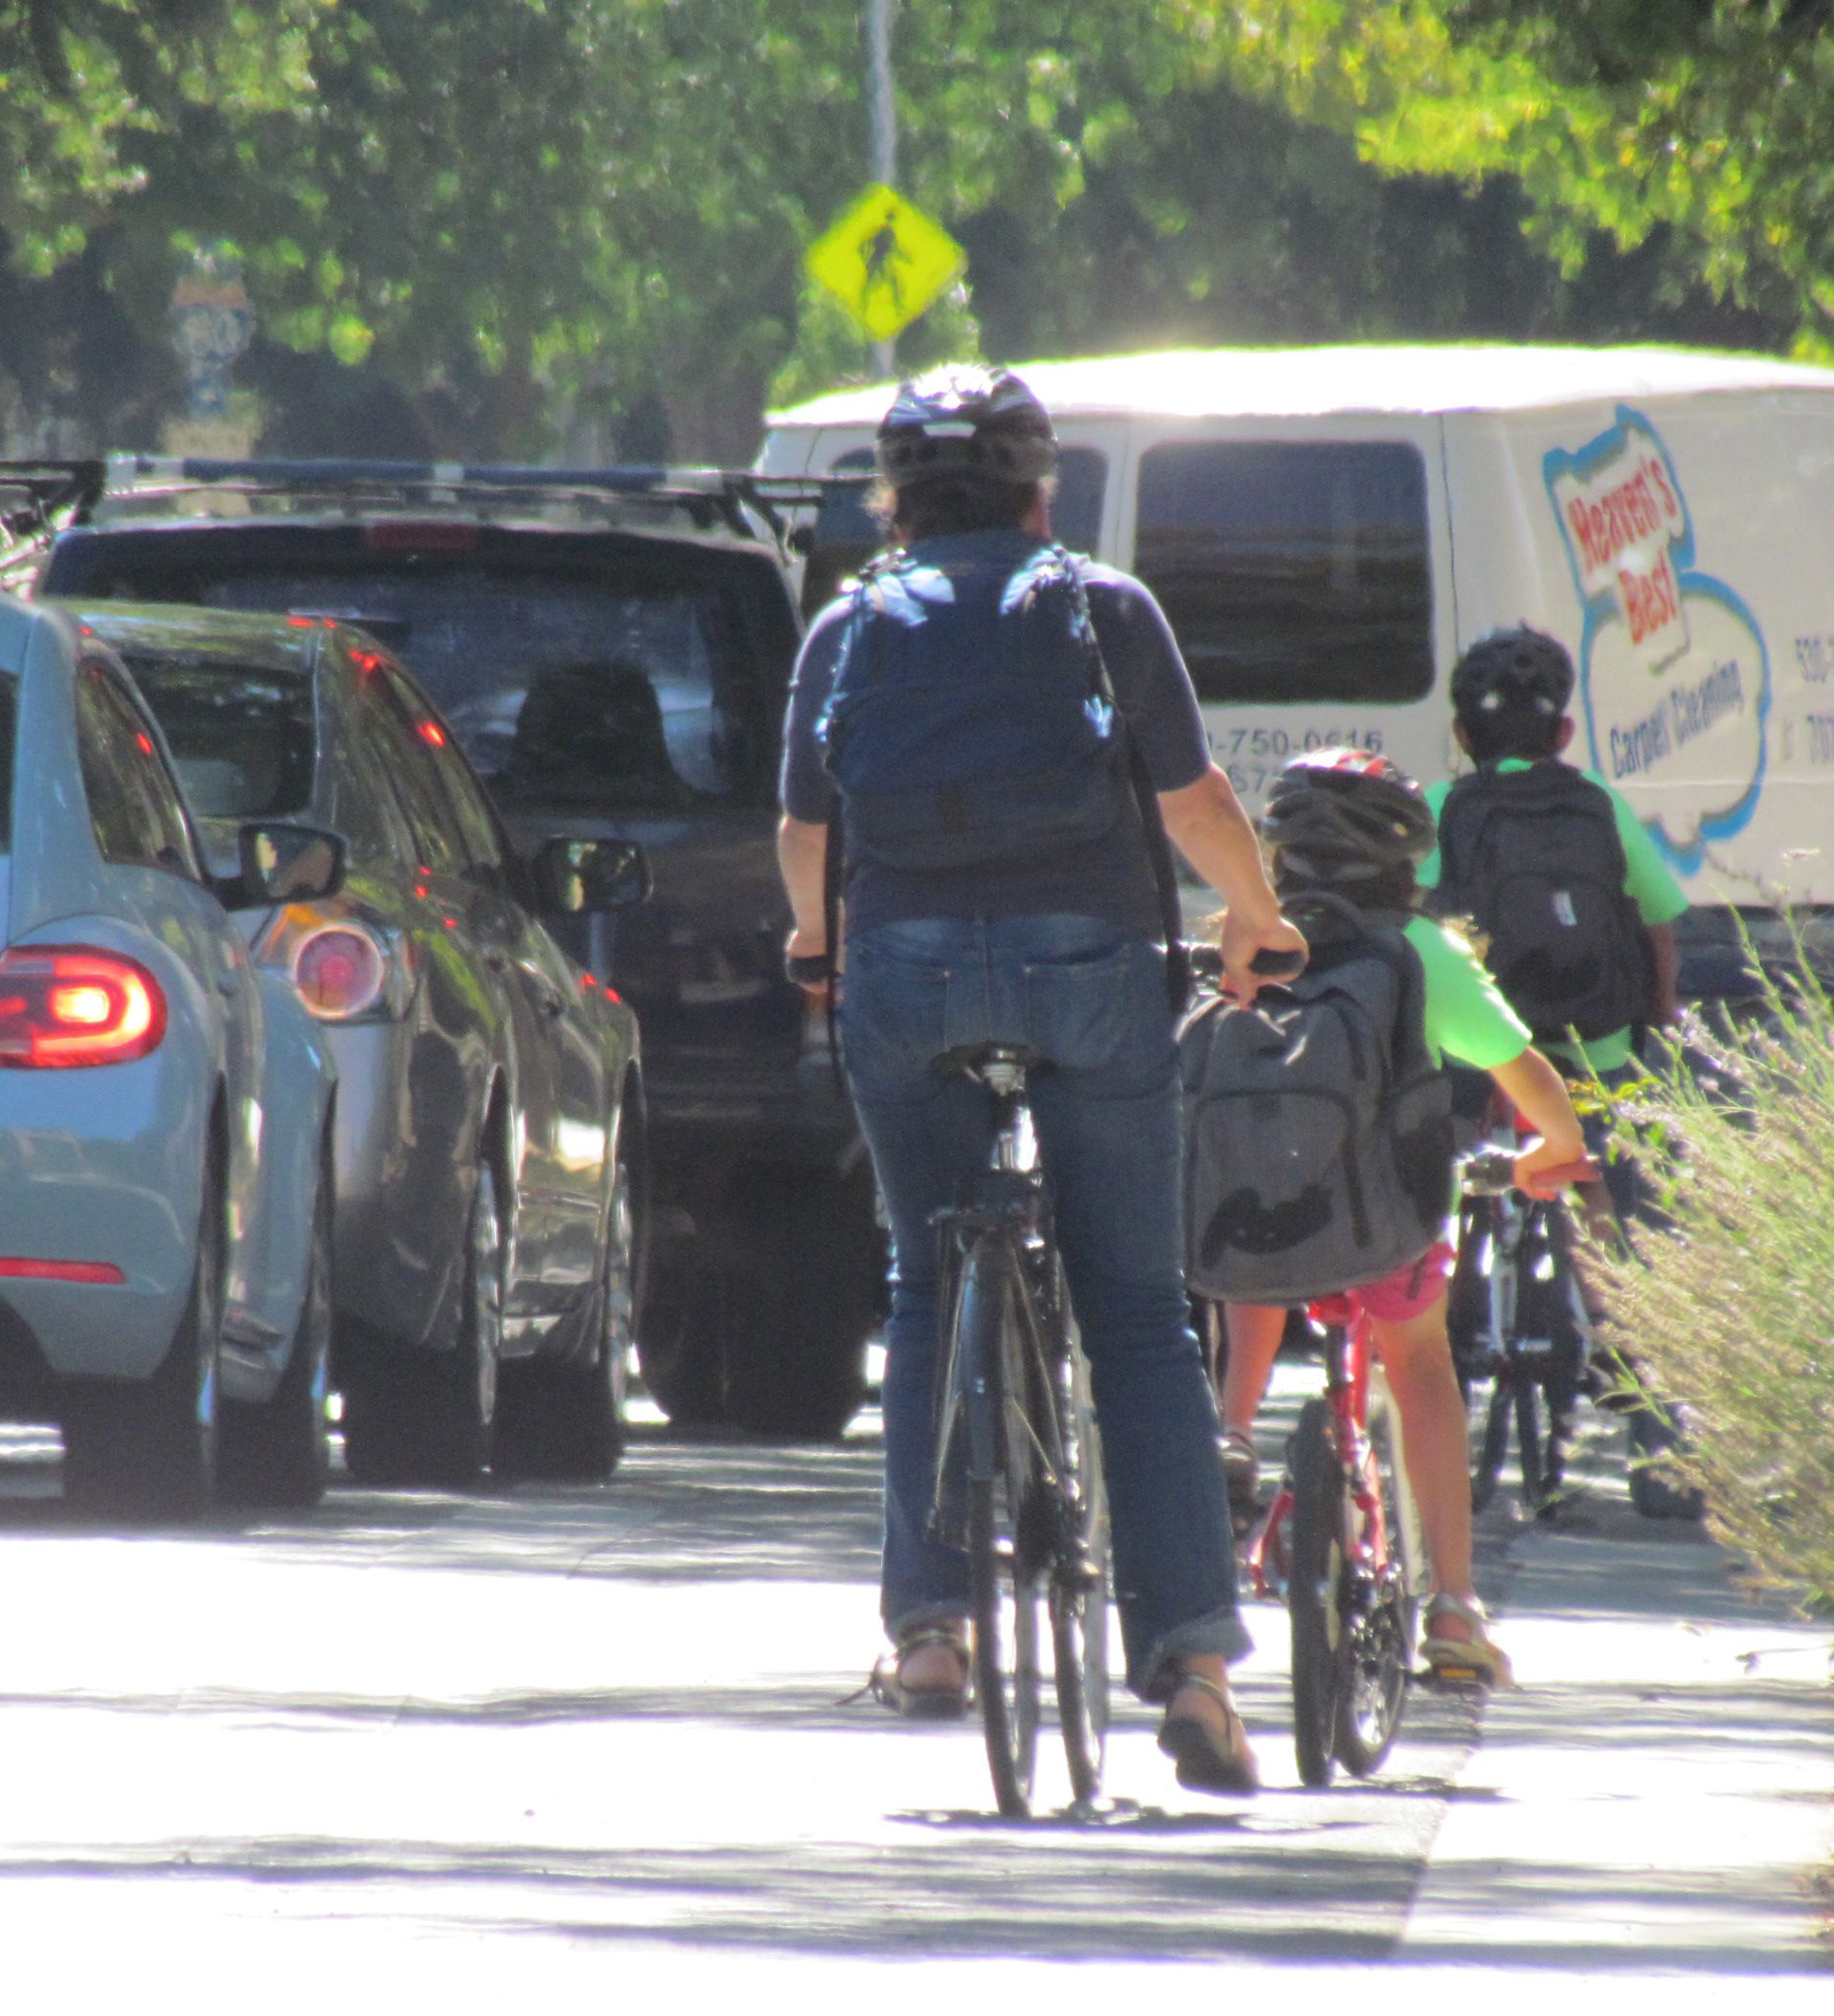 If we want people to drive less and use active modes more, we need to make sure our transportation funding plans reflect that. Photo: Melanie Curry/Streetsblog